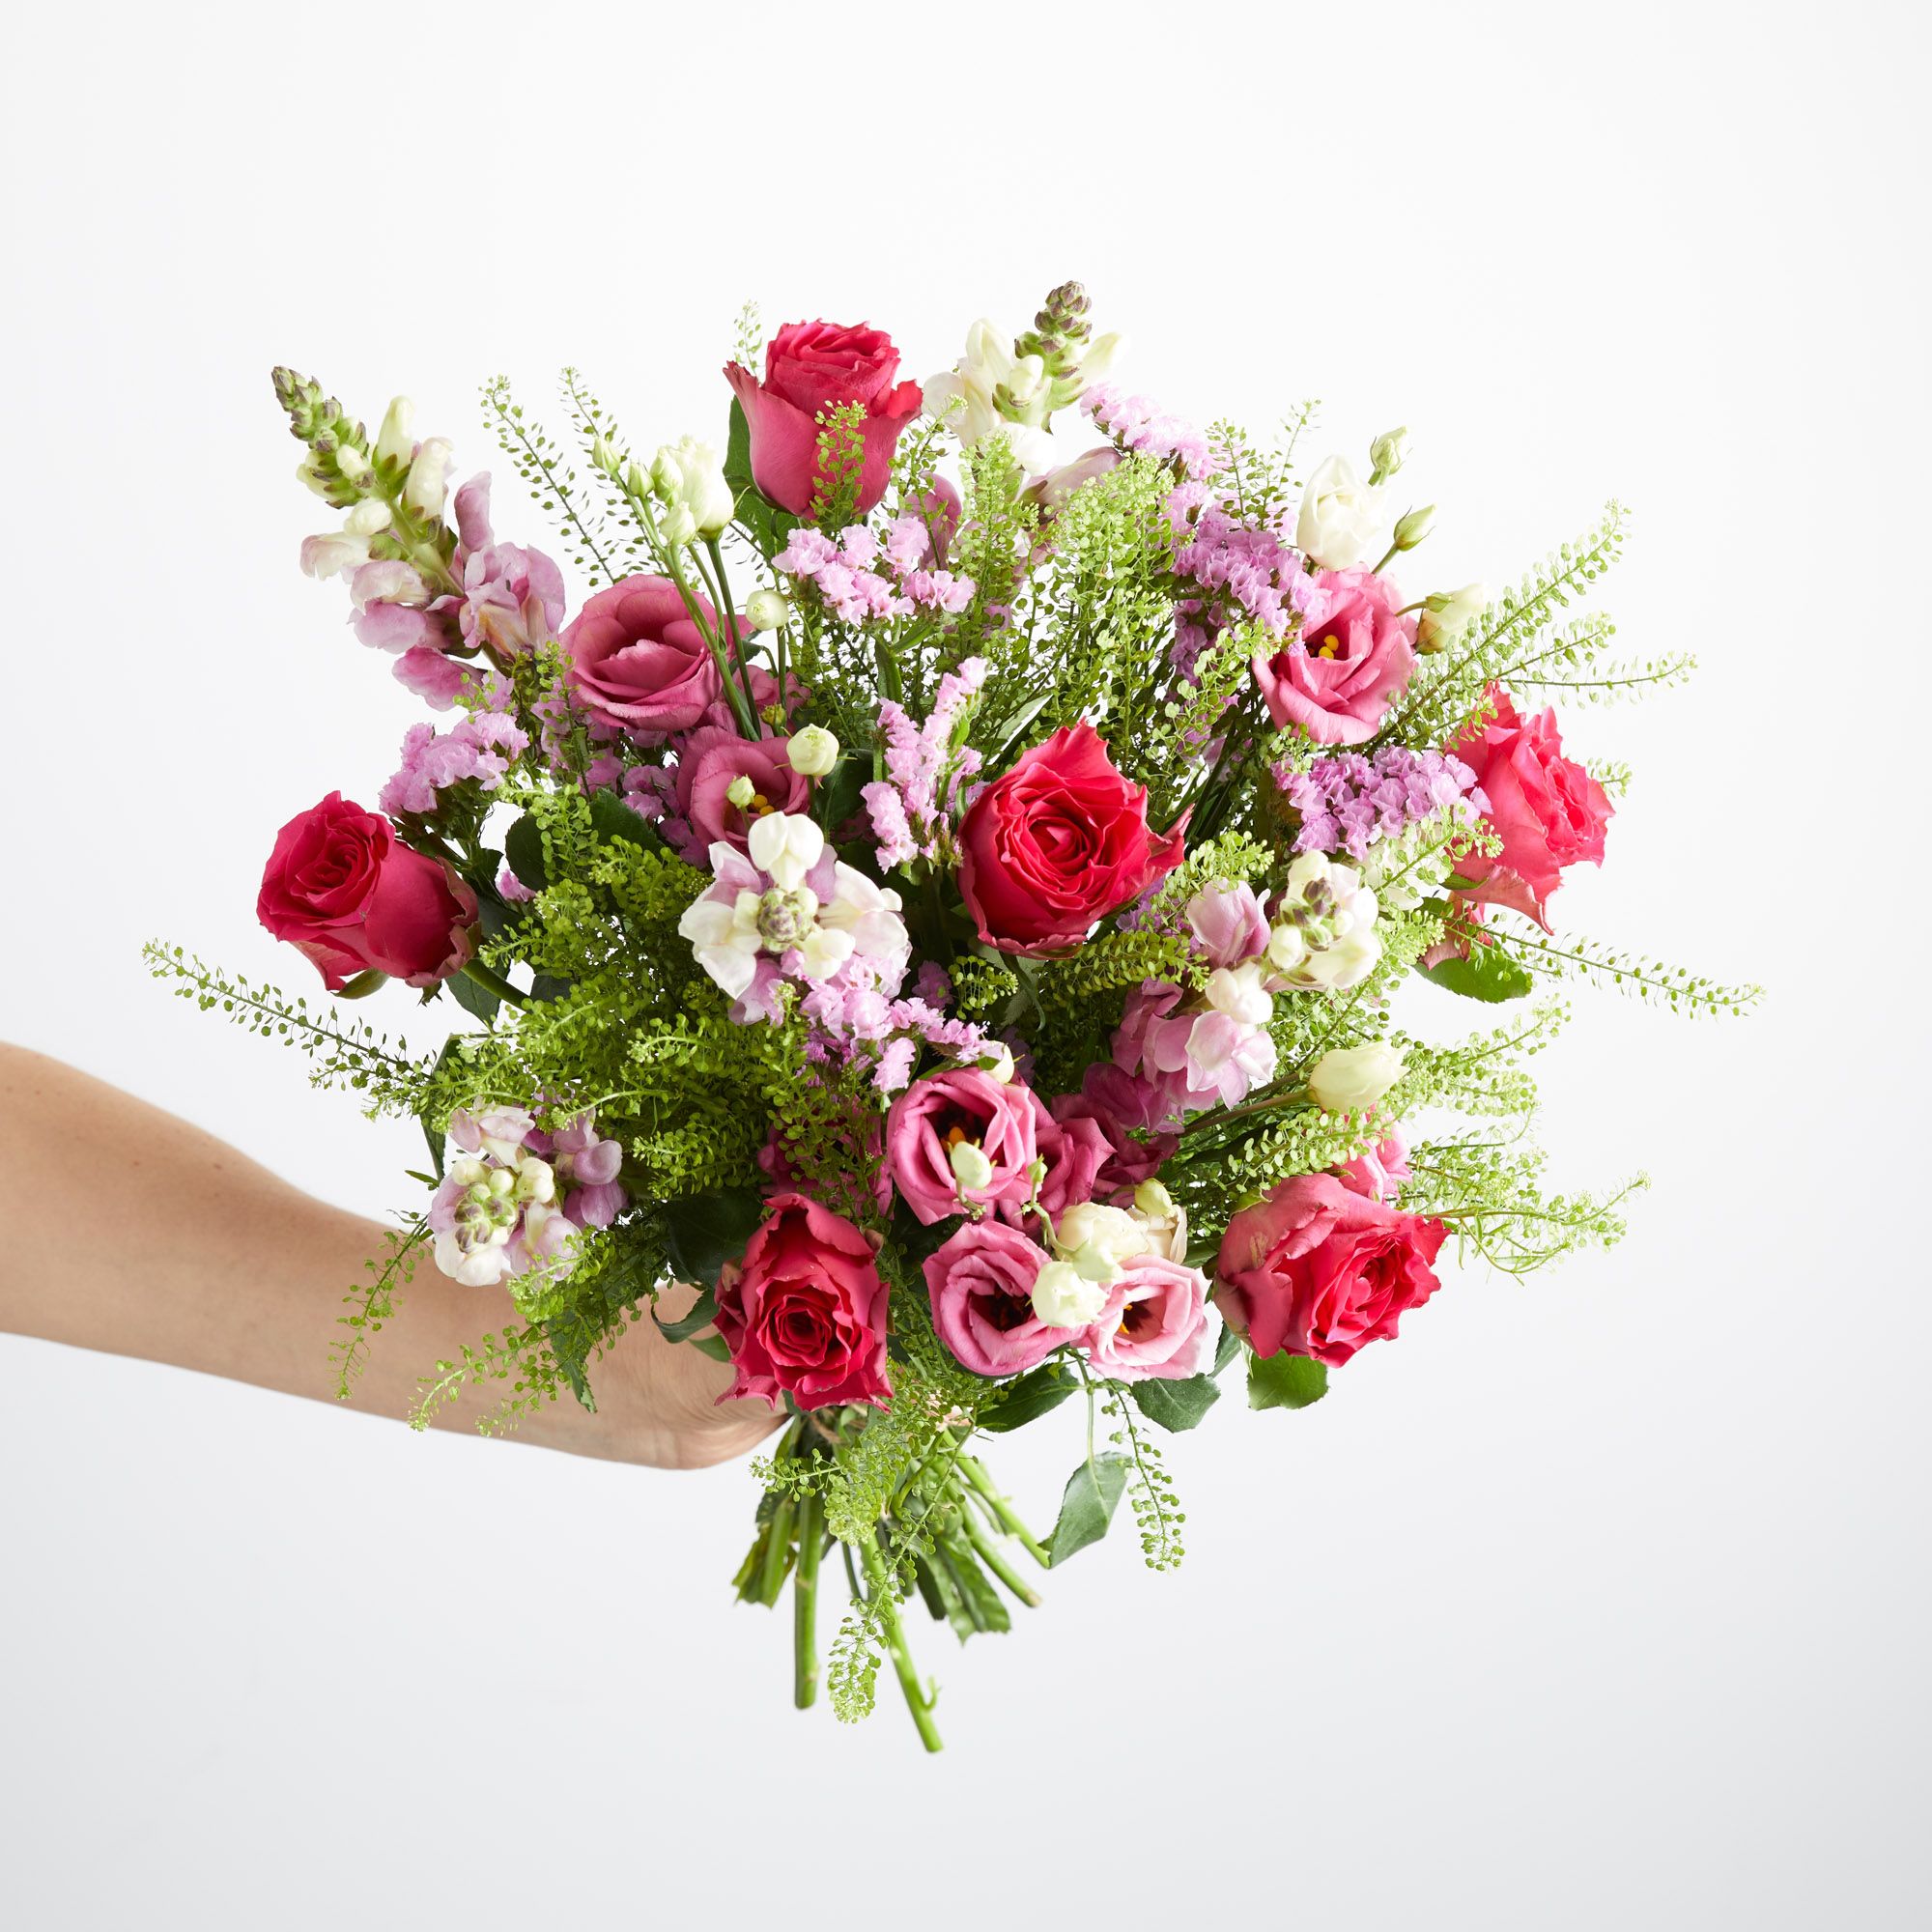 W19 Pet_Roses, lisianthus, antirrhinums, statice and greenbell.jpeg